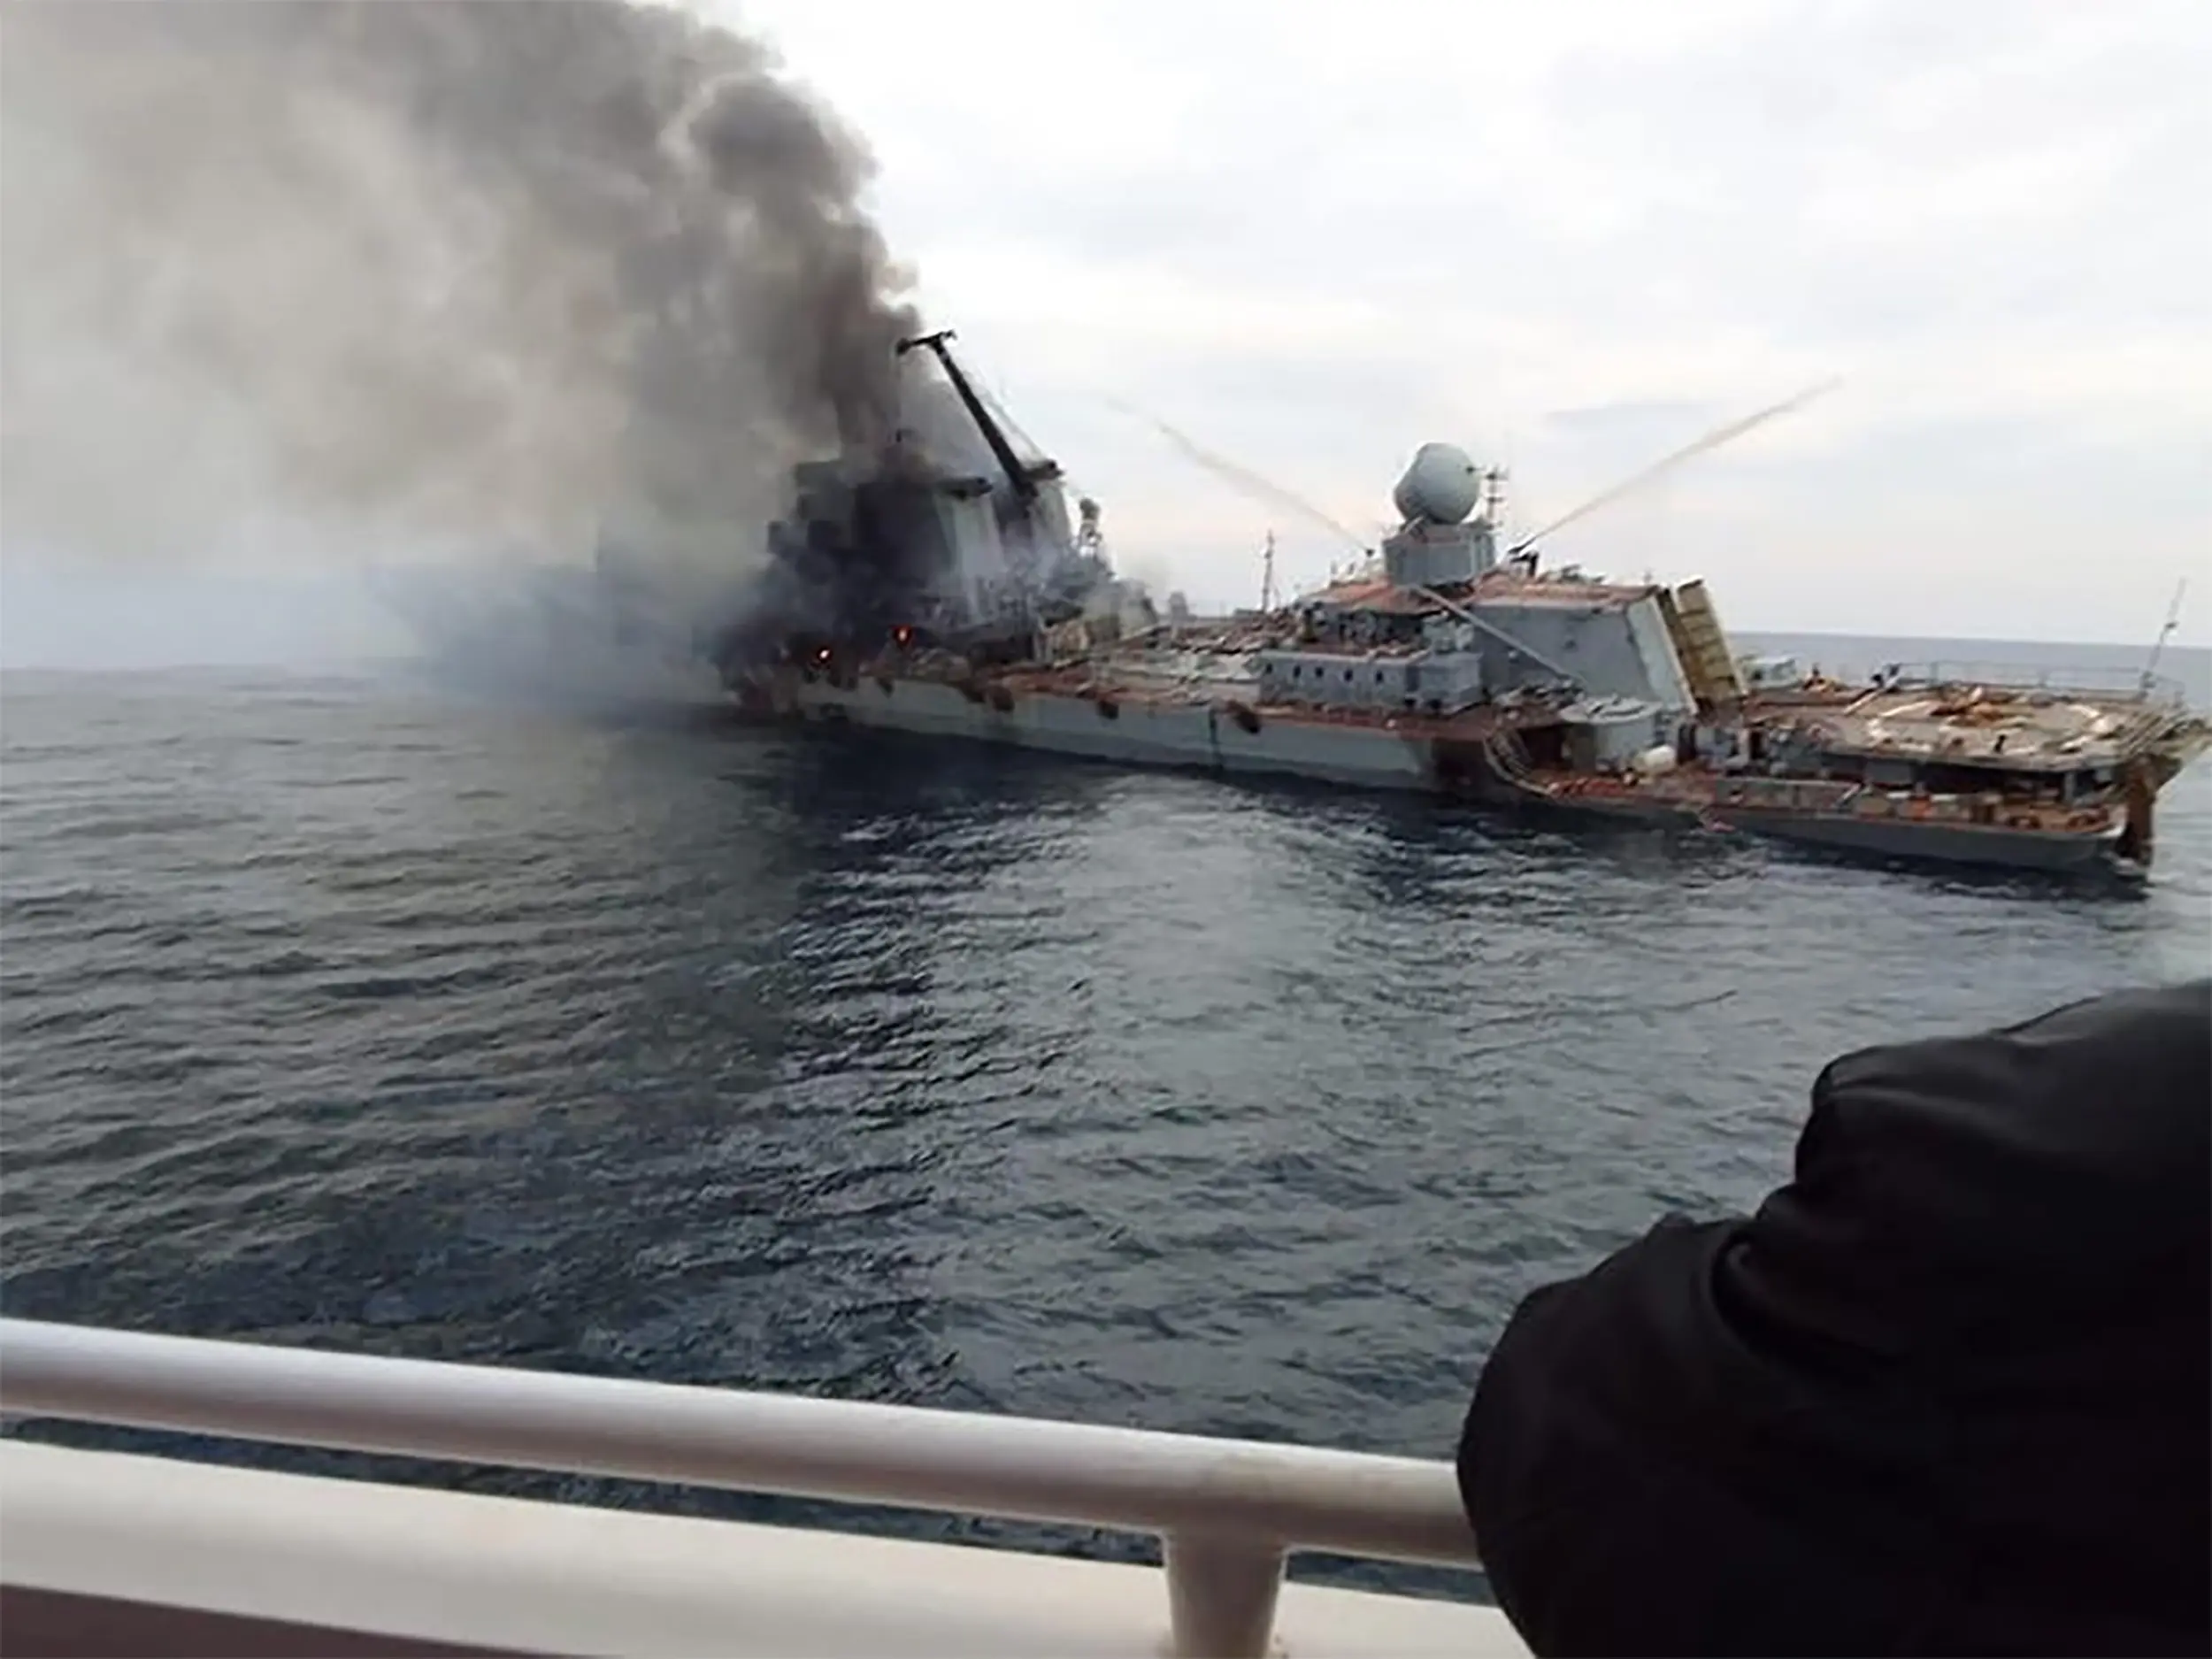 A huge military ship on the water is on fire with dark grey smoke coming out of it.